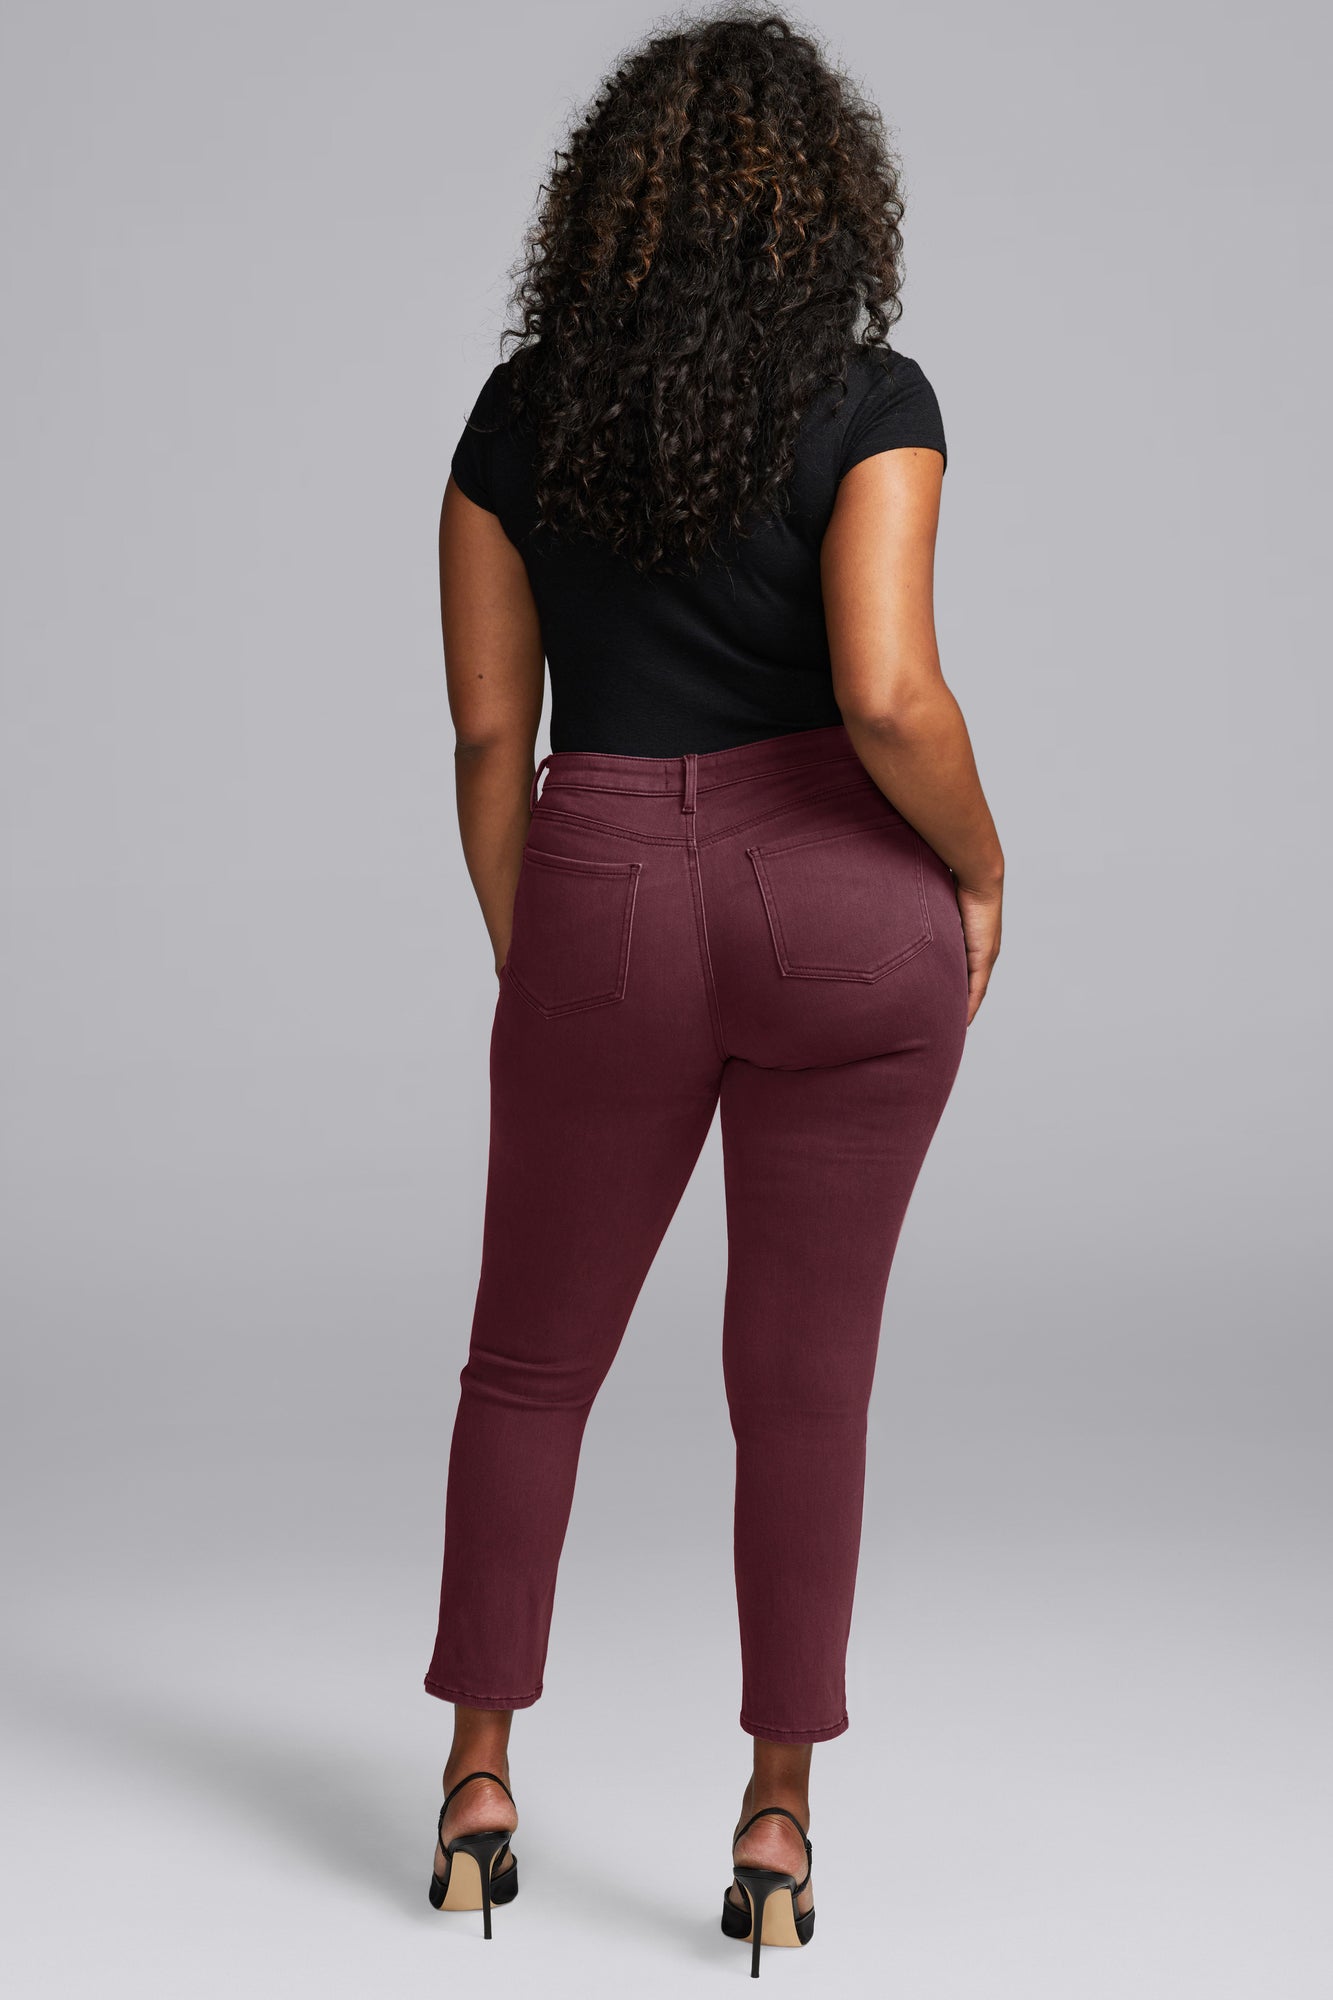 NYDJ Slim Straight Ankle Jeans In Short Inseam In Curves 360 Denim - Deep Currant